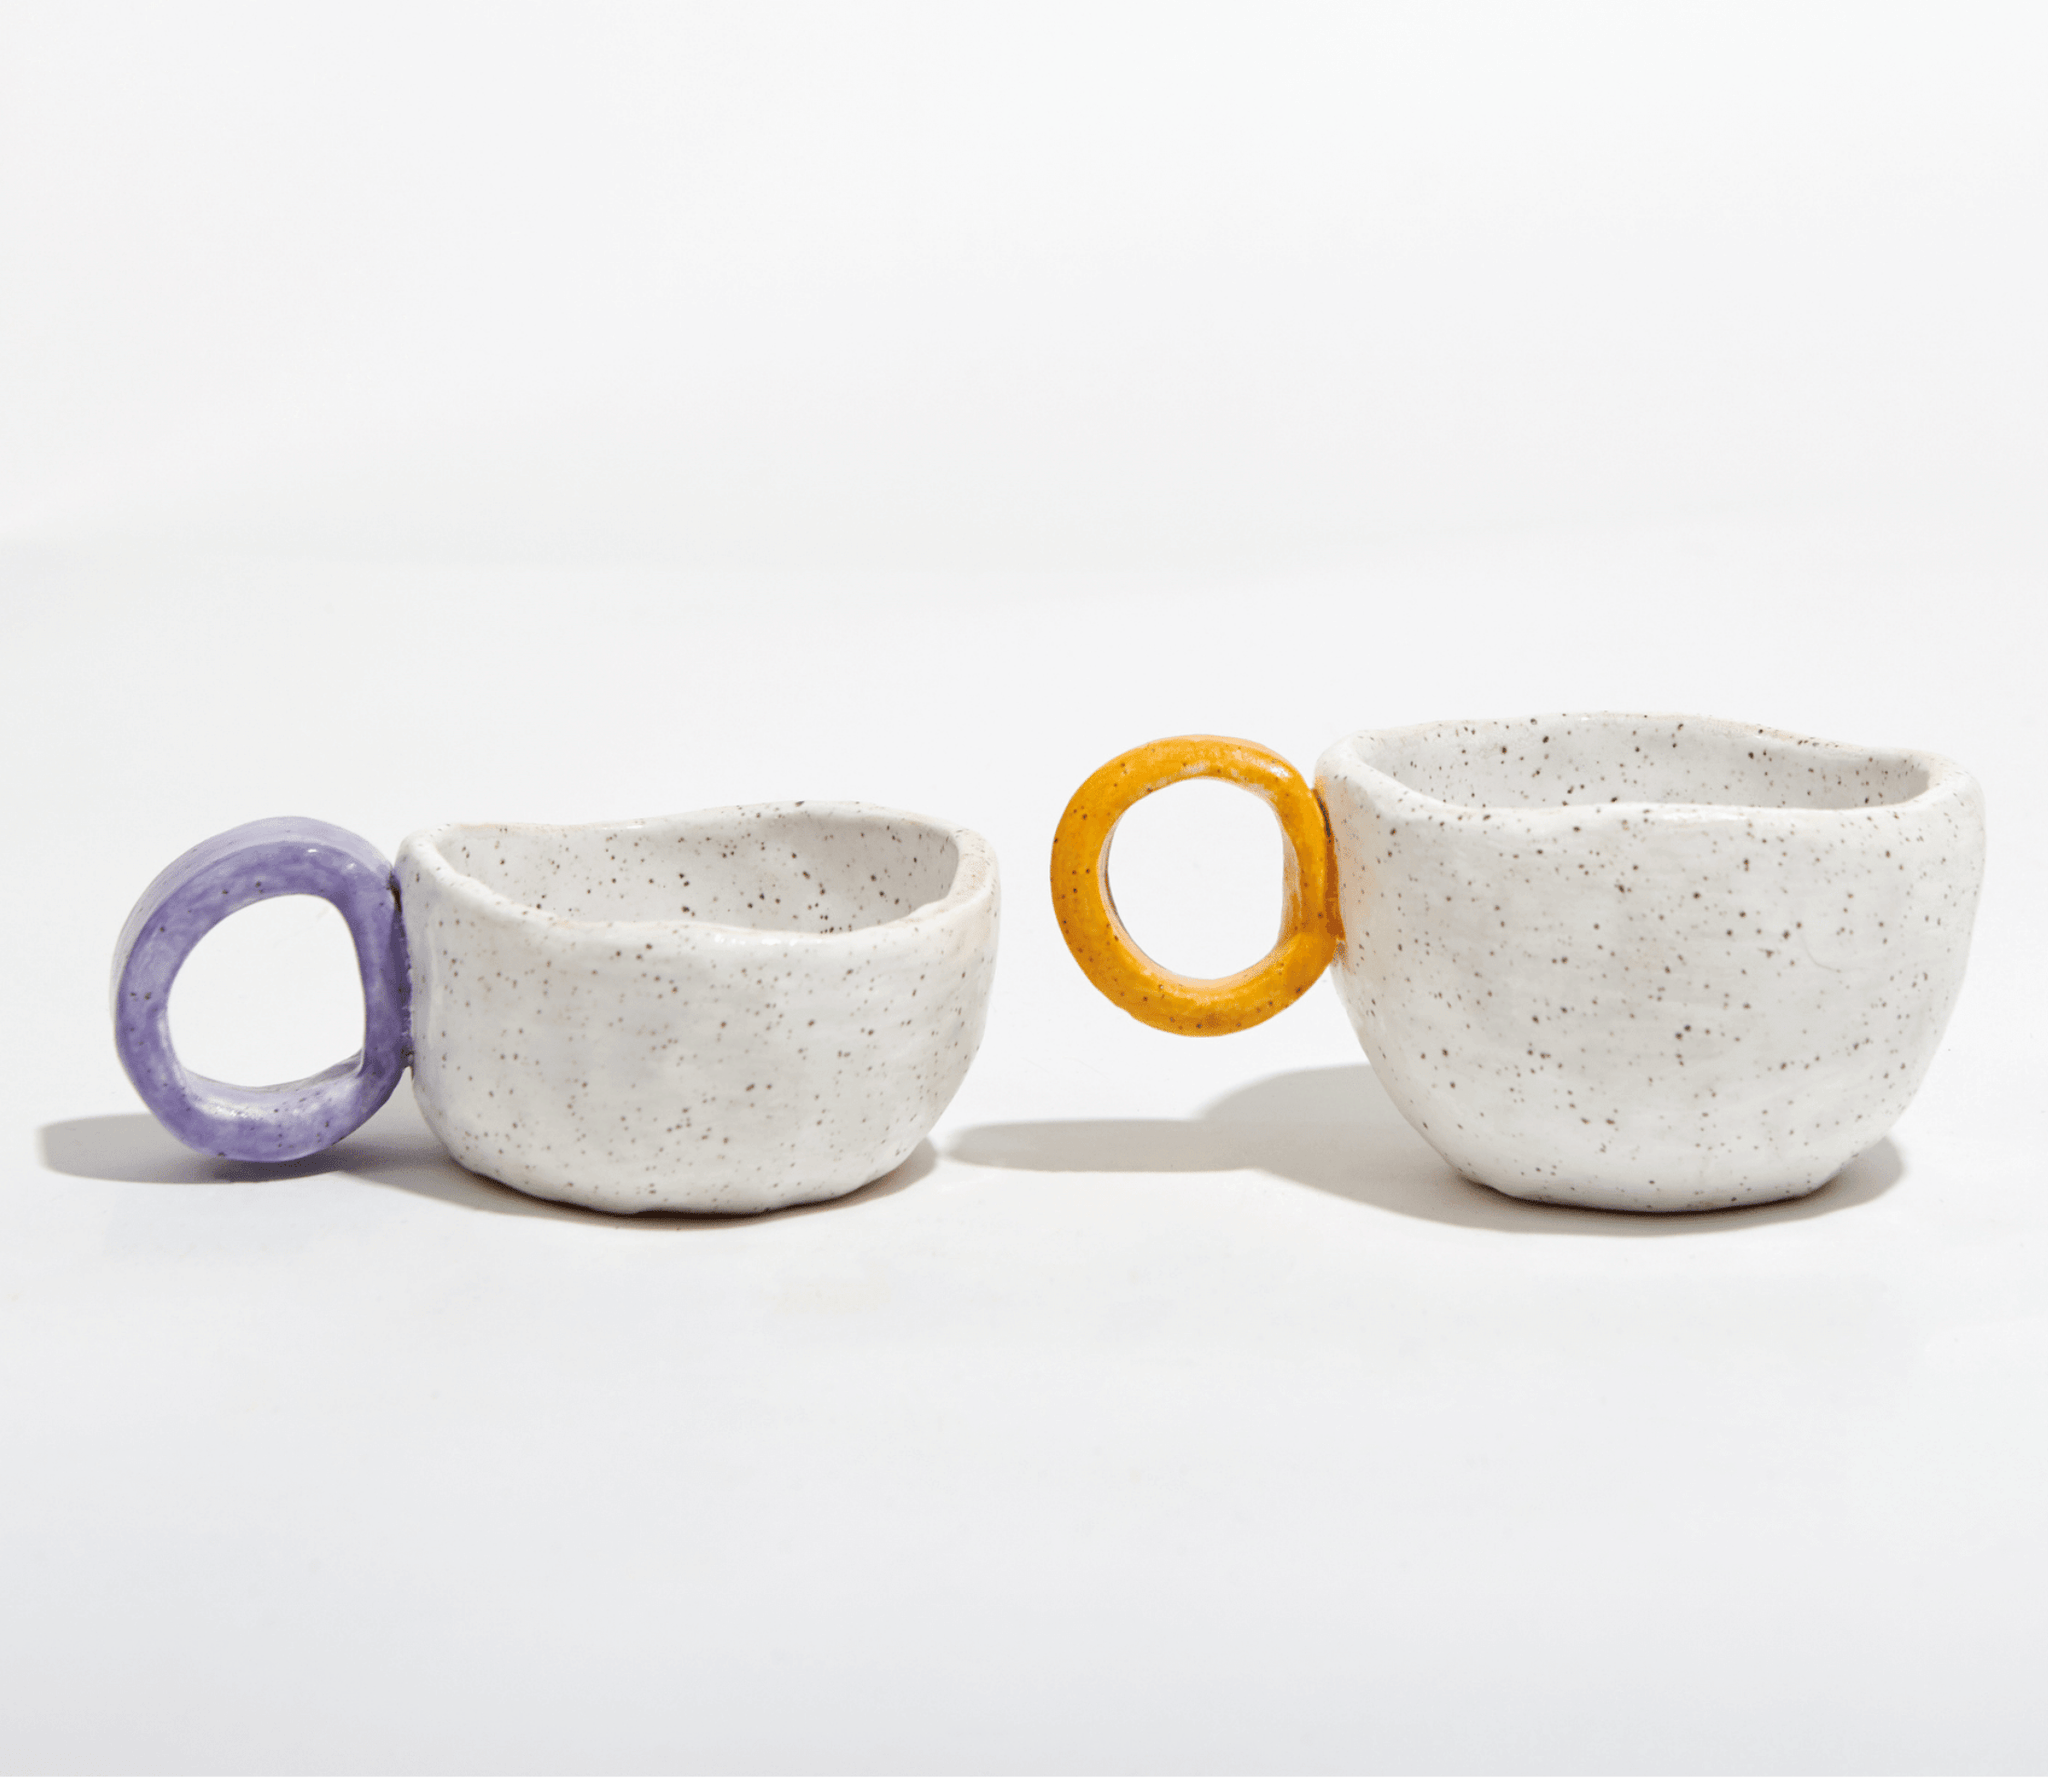 Porcelain or Ceramic? Know Your Coffee Mug Material for the Best Experience